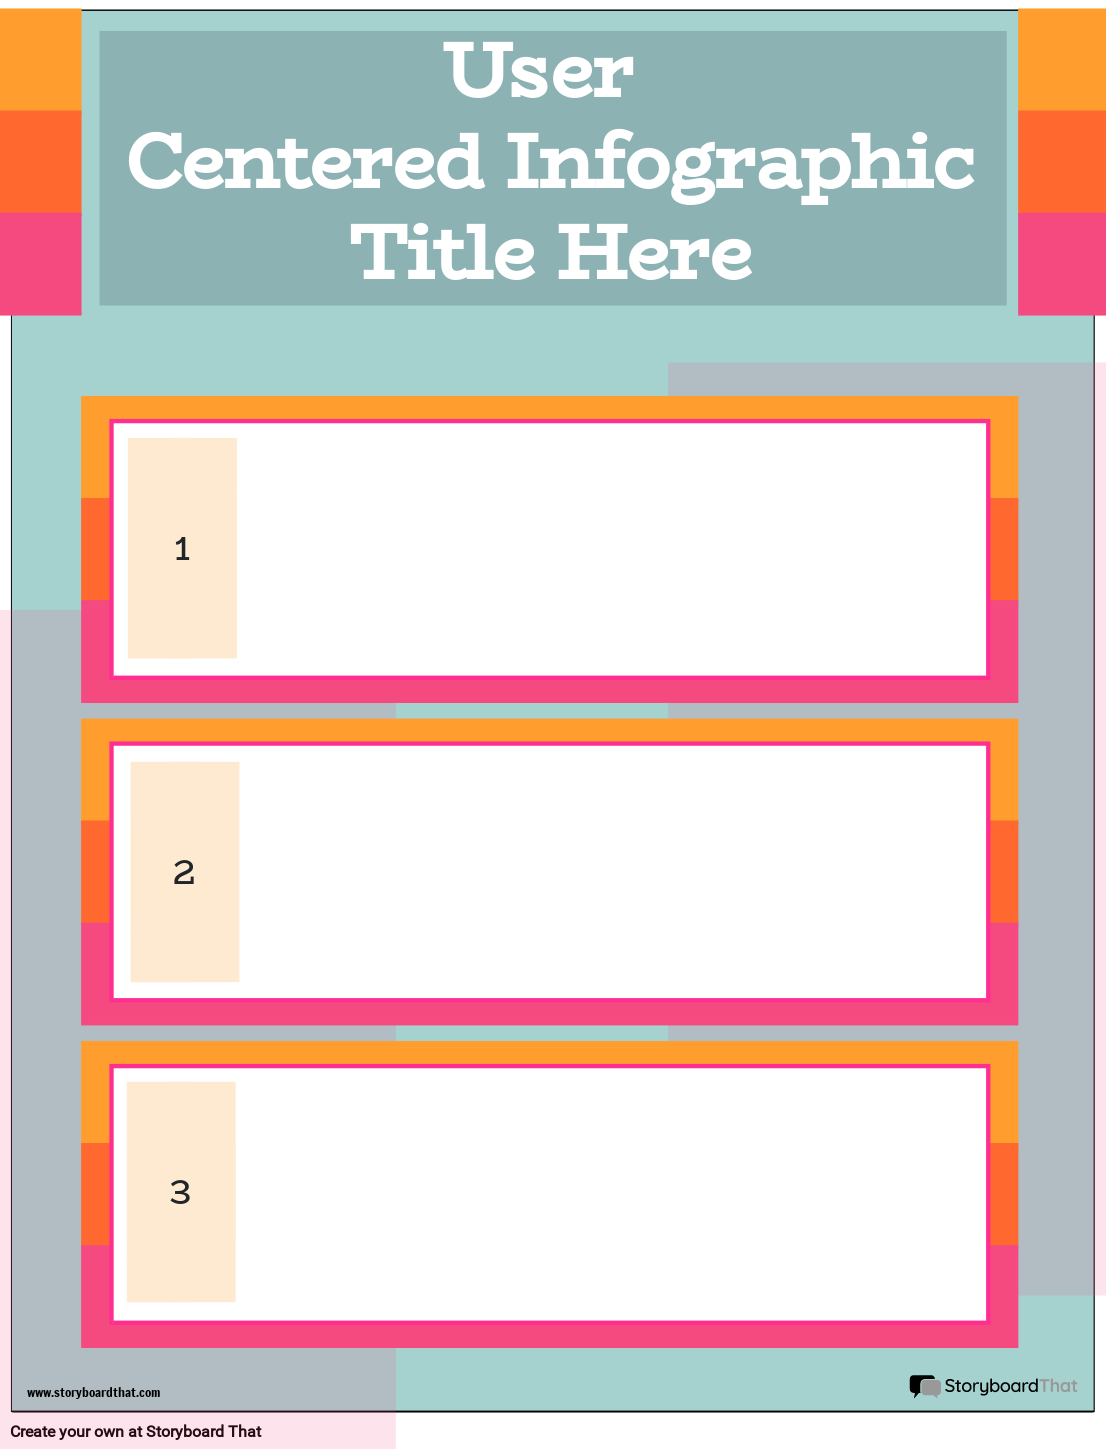 Corporate User Centered Infographic Template 4